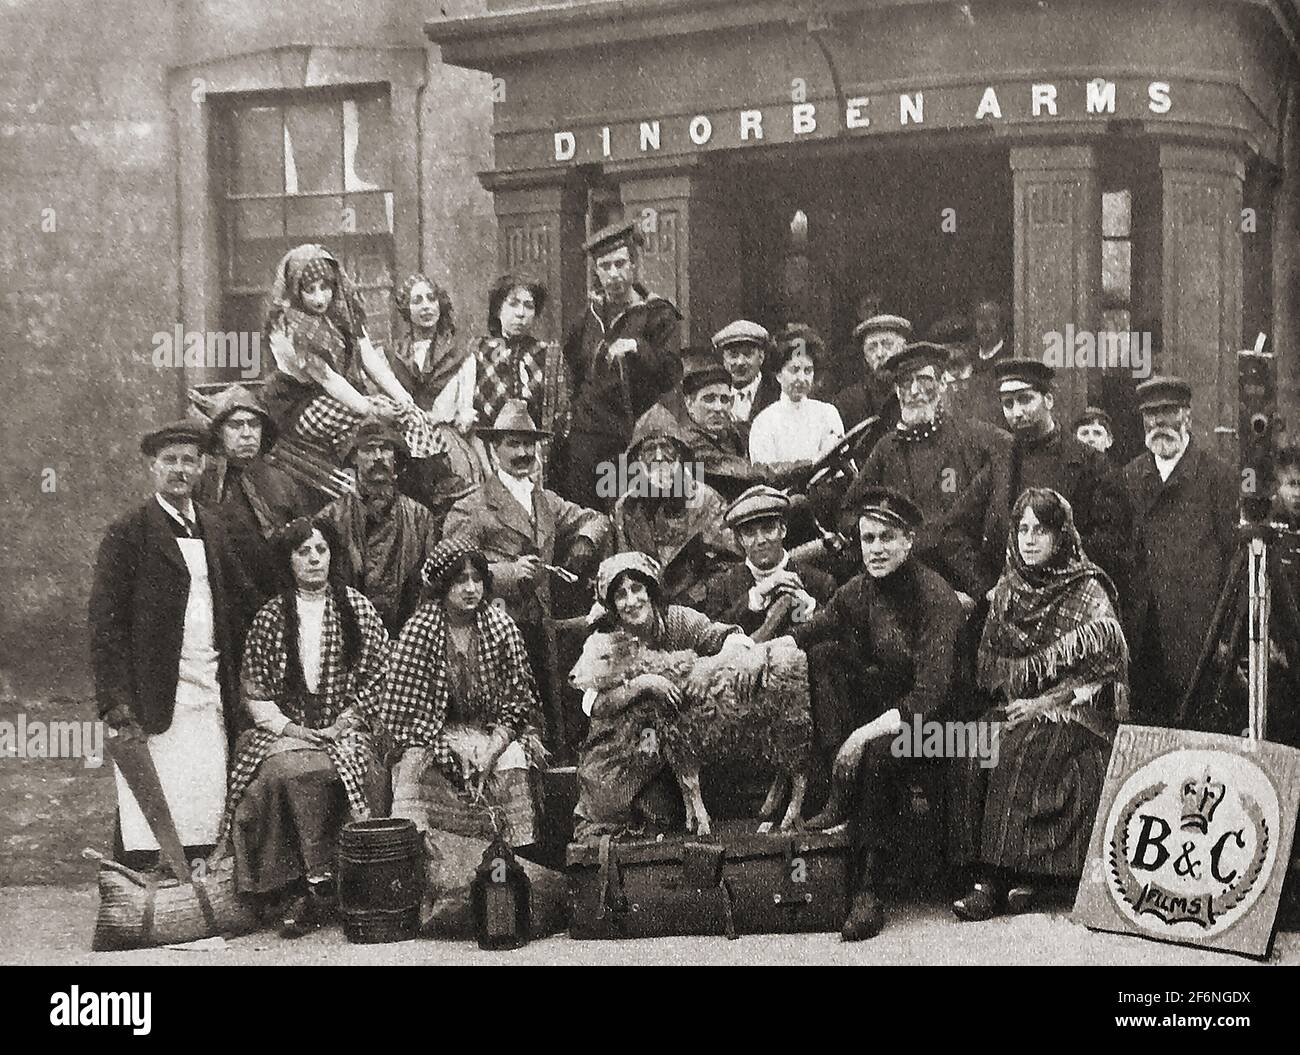 Film making in Britain prior to WWI. Actors from B & C films gather for a photo shoot in 1914 outside the Dinorben Arms. British & Colonial Films was a British company making mostly silent films in London 1908 -1924.  Later in 1908 The British and Colonial Kinematograph Company was formed in 1908 by Albert Henry ('Bert') Bloomfield (c.1882–1933) & John Benjamin ('Mac') McDowell (1878–1954). Operating from a rented basement in central London, they used only one camera and developed the negatives in McDowell's house. Later they  moved to their own studio at Newstead House ,East Finchley, London. Stock Photo